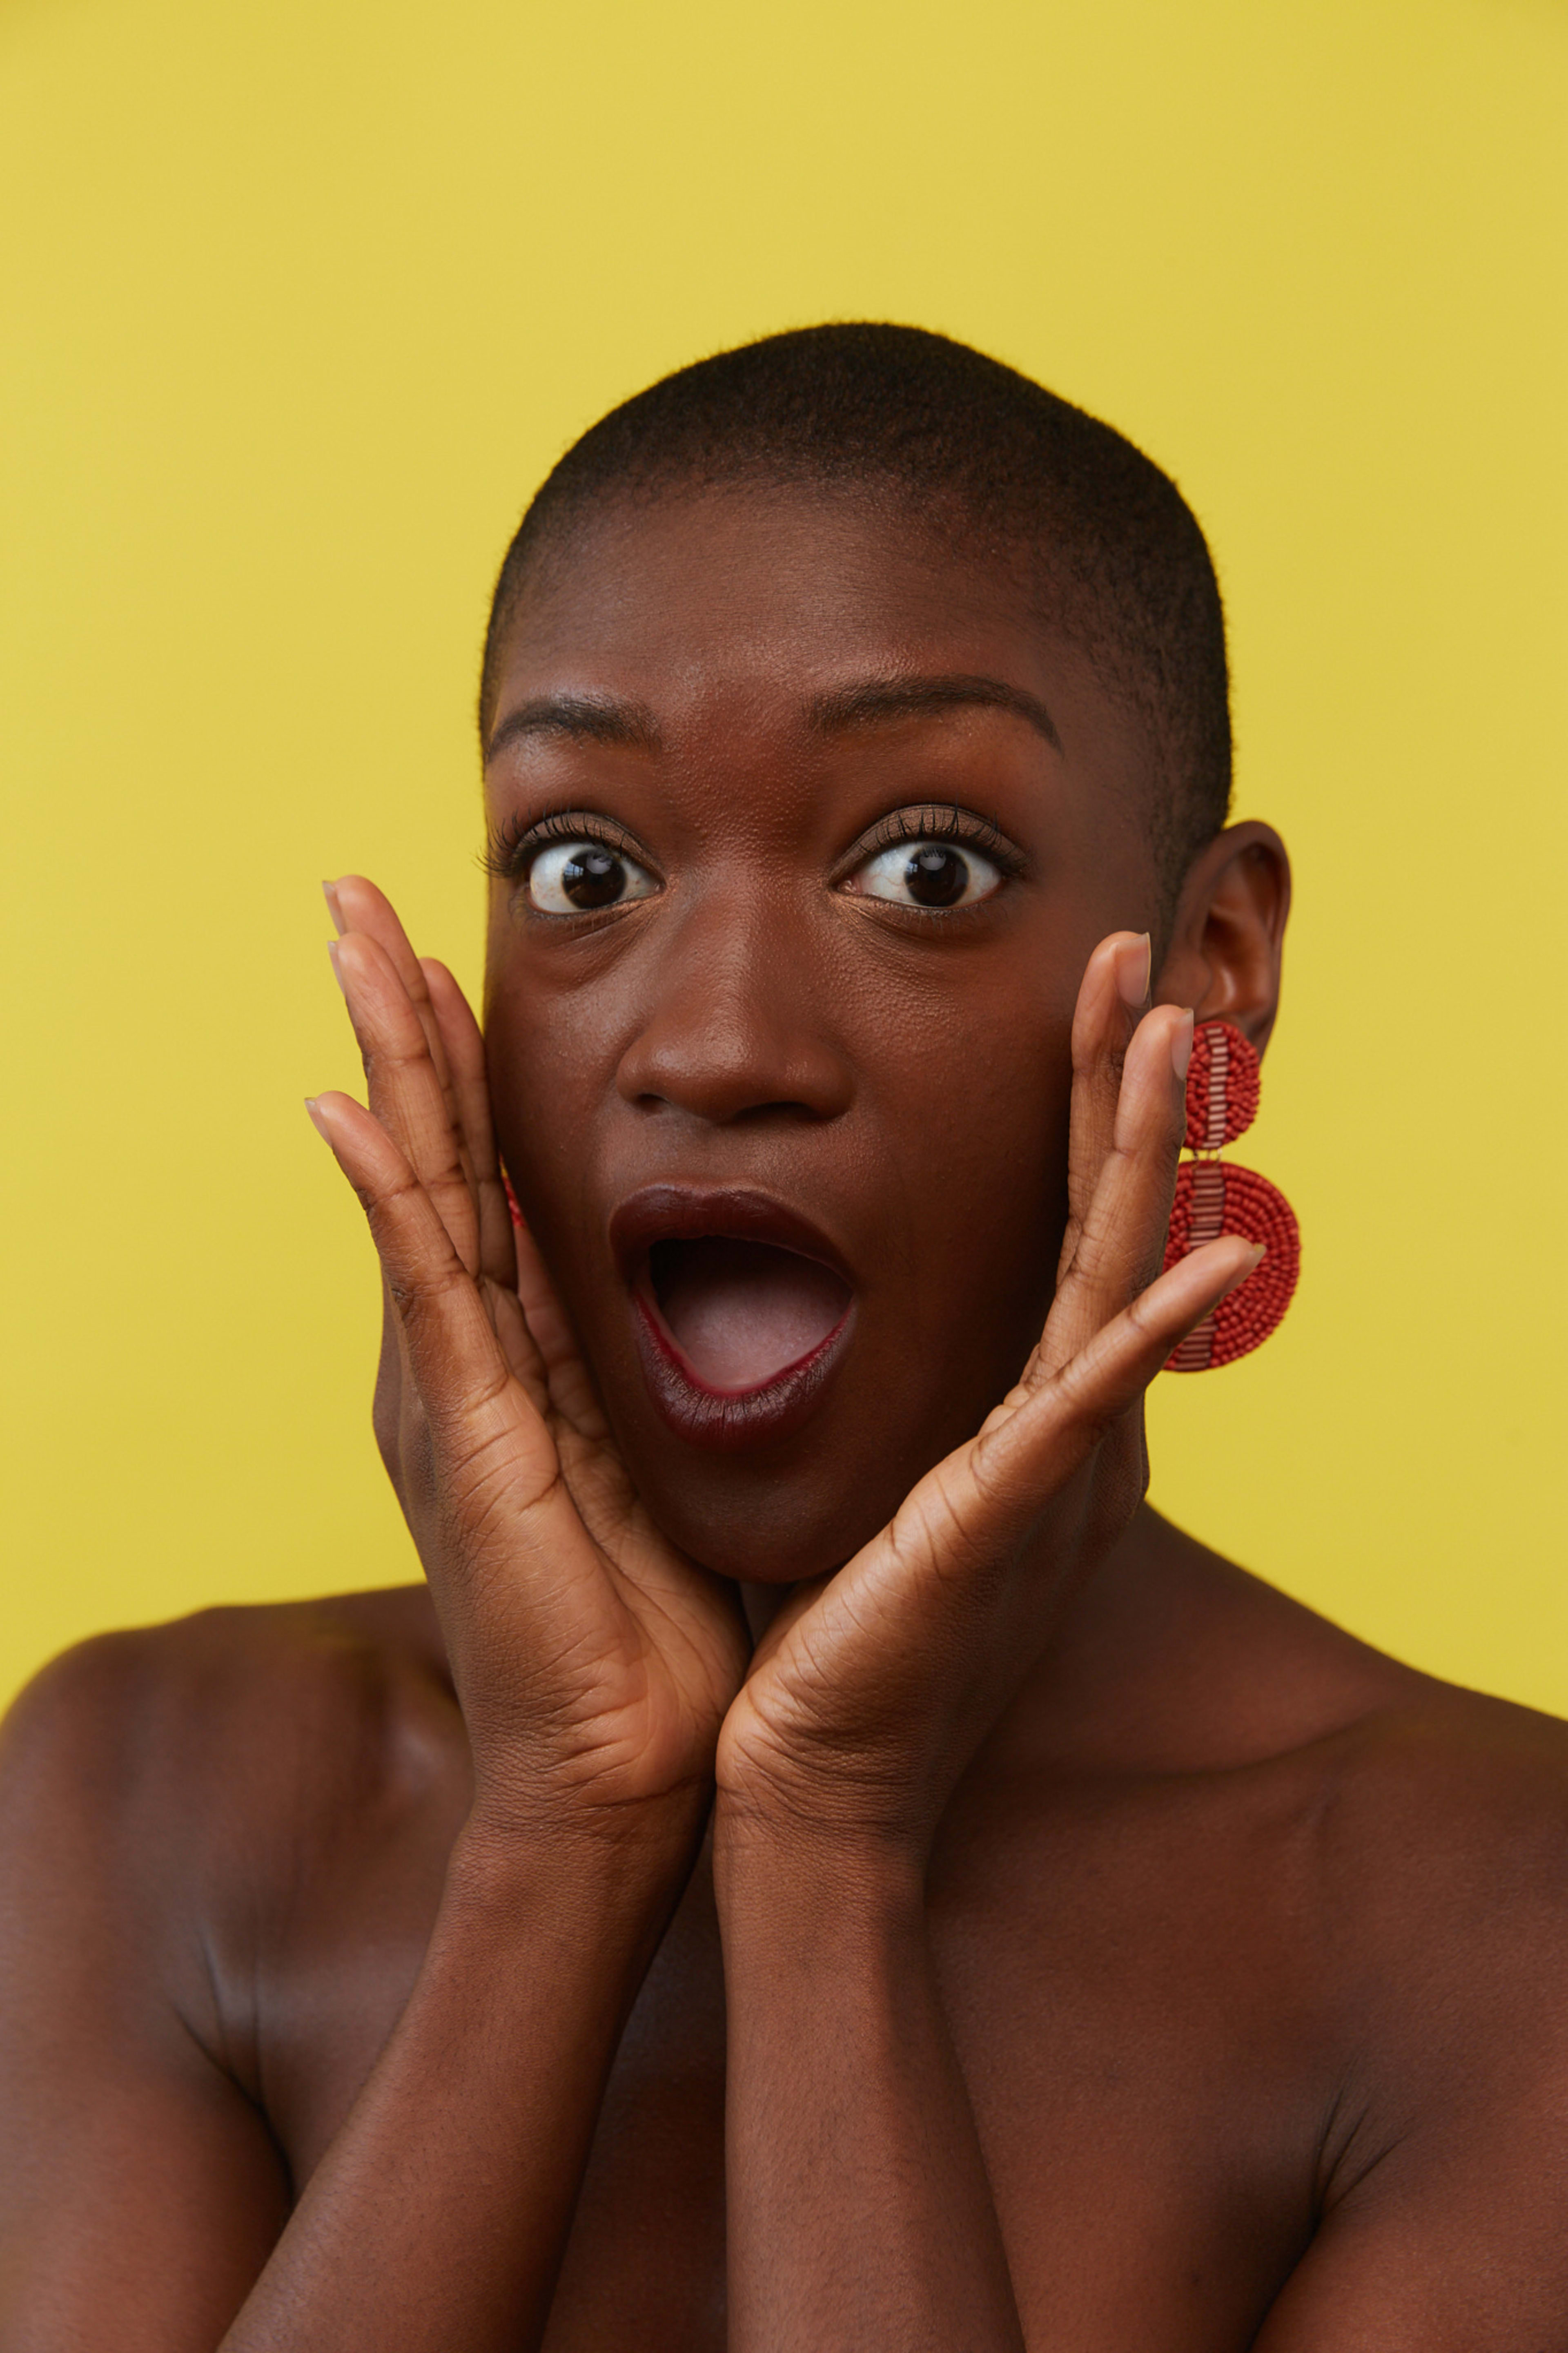 A woman with a surprised look on her face in a photoshoot.